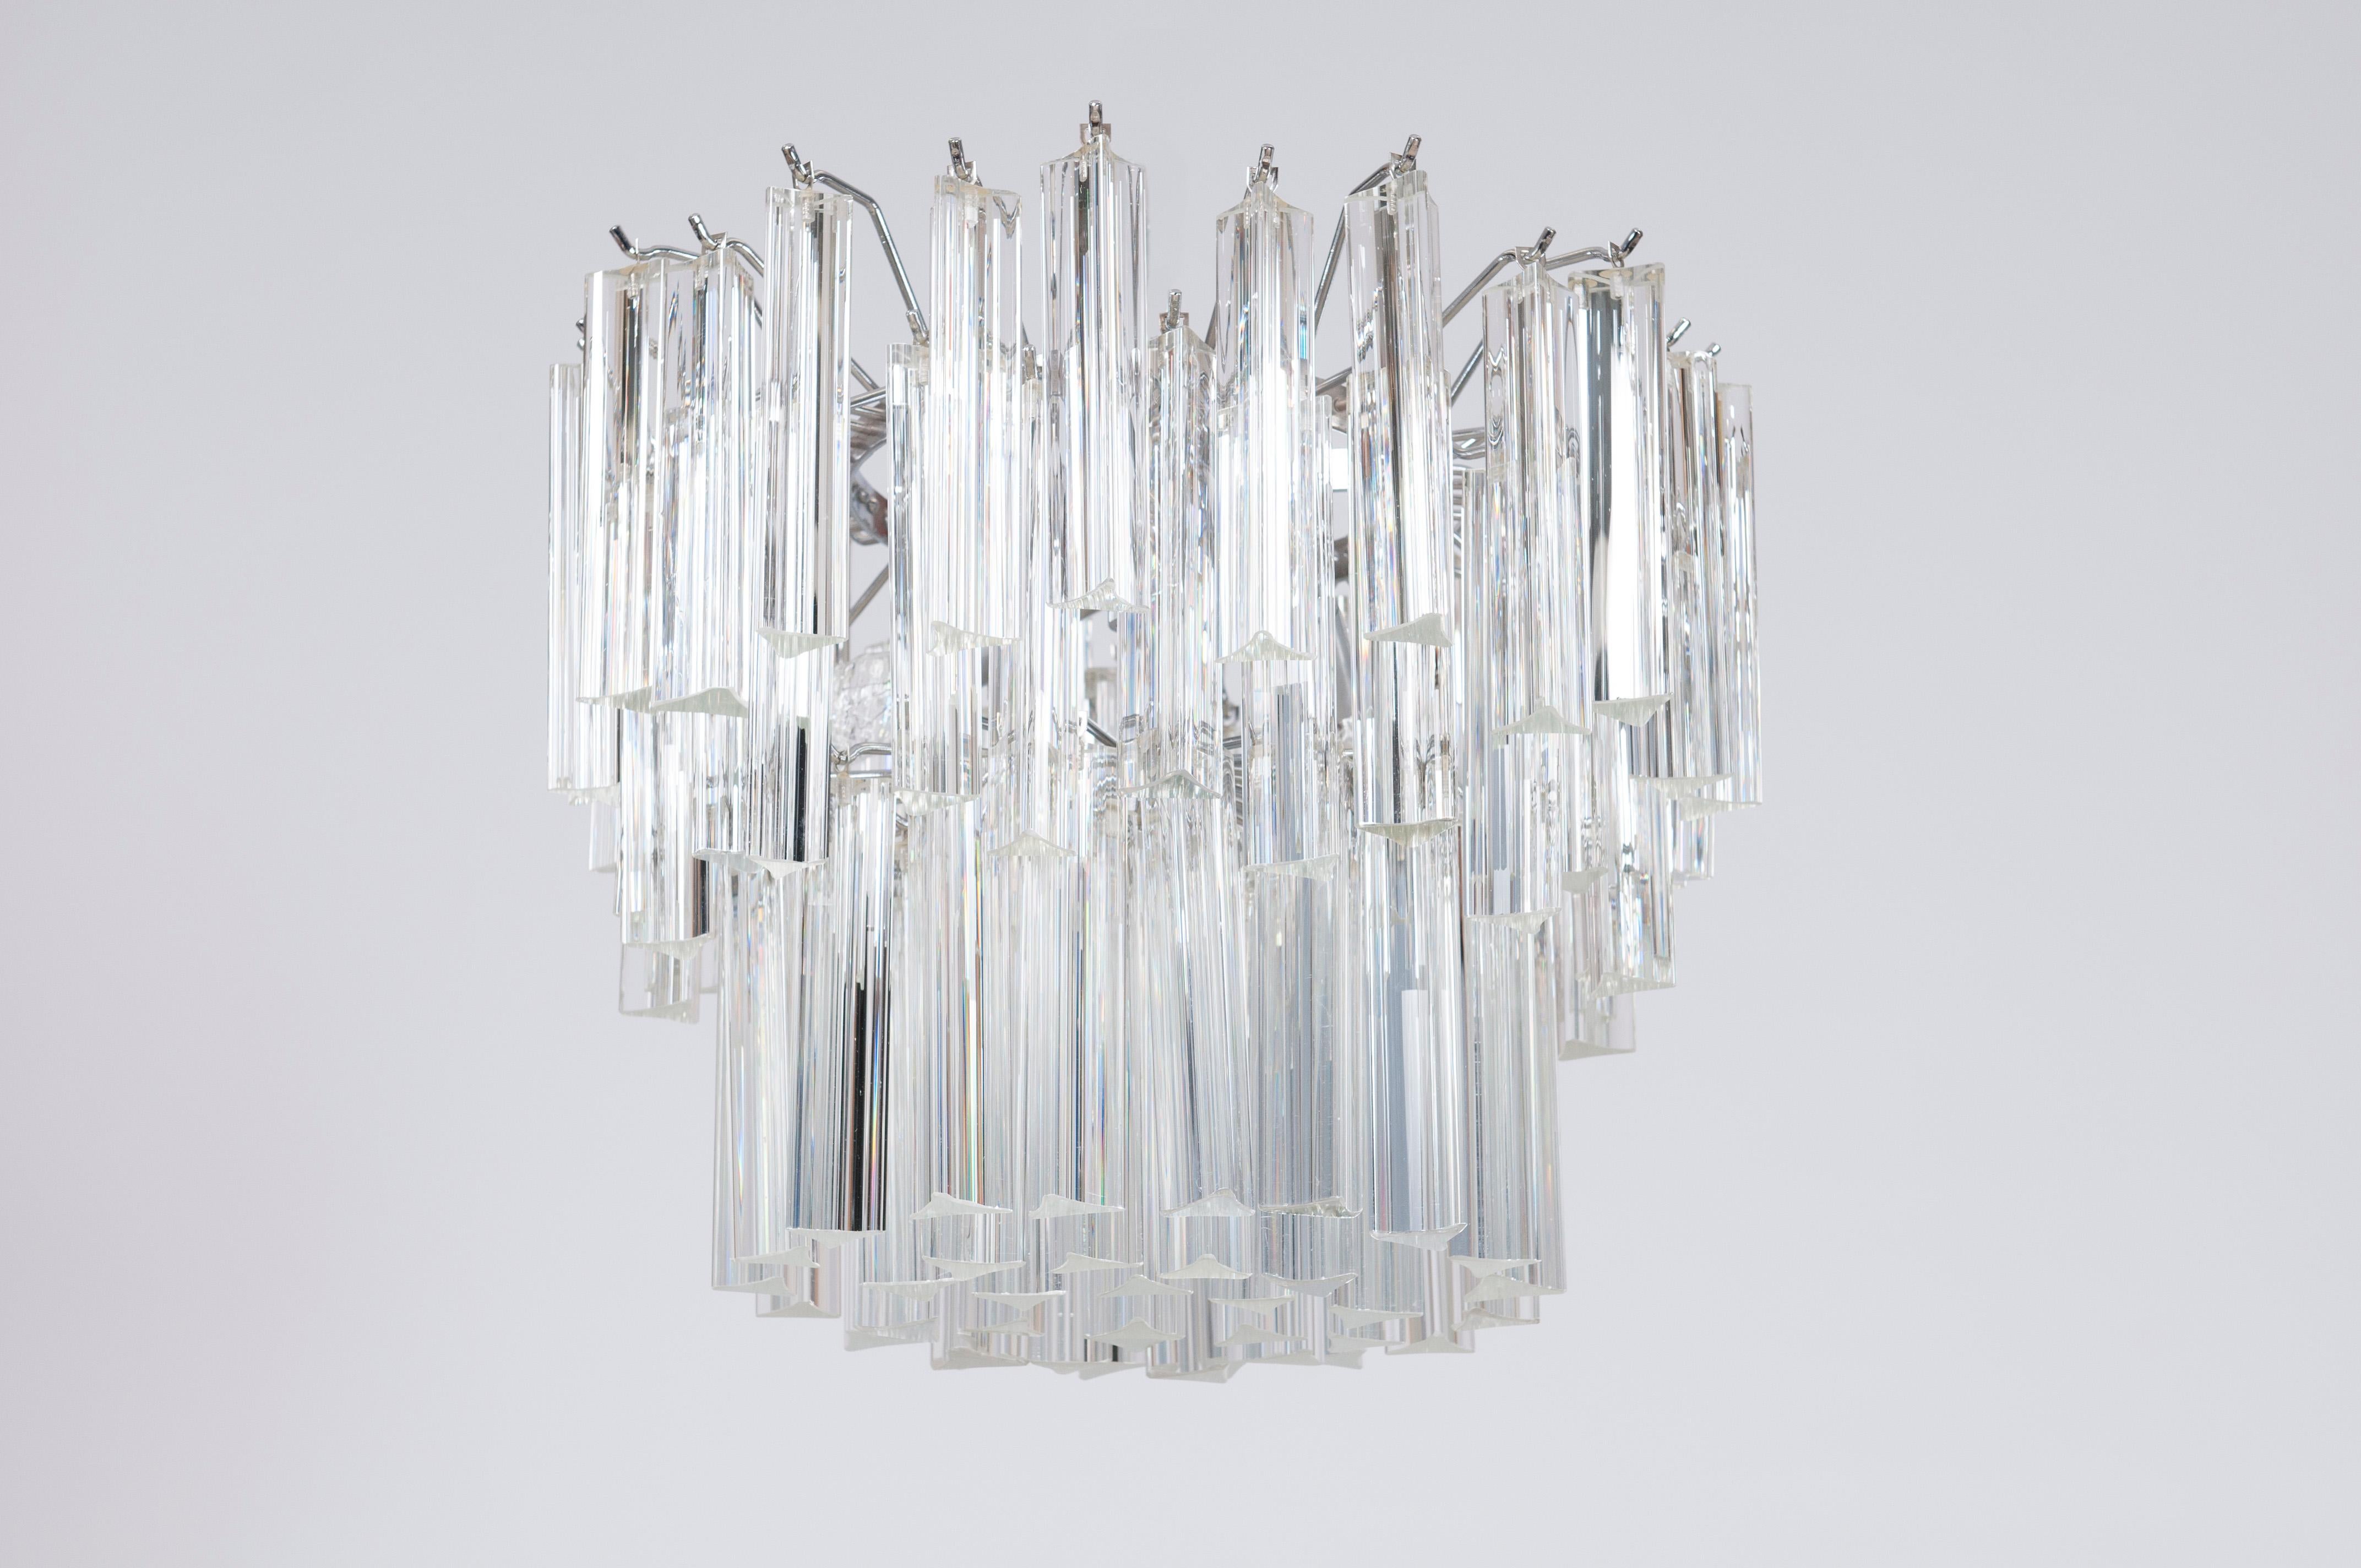 Shiny Camer Murano Glass Chandelier Clear colors Trihedrons 1960s Italy.
Entirely handmade of Murano glass and steel in the 1960s, this luxurious chandelier is a creation of the Venetian glassmaker.
It consists of two rounds of perfectly finished